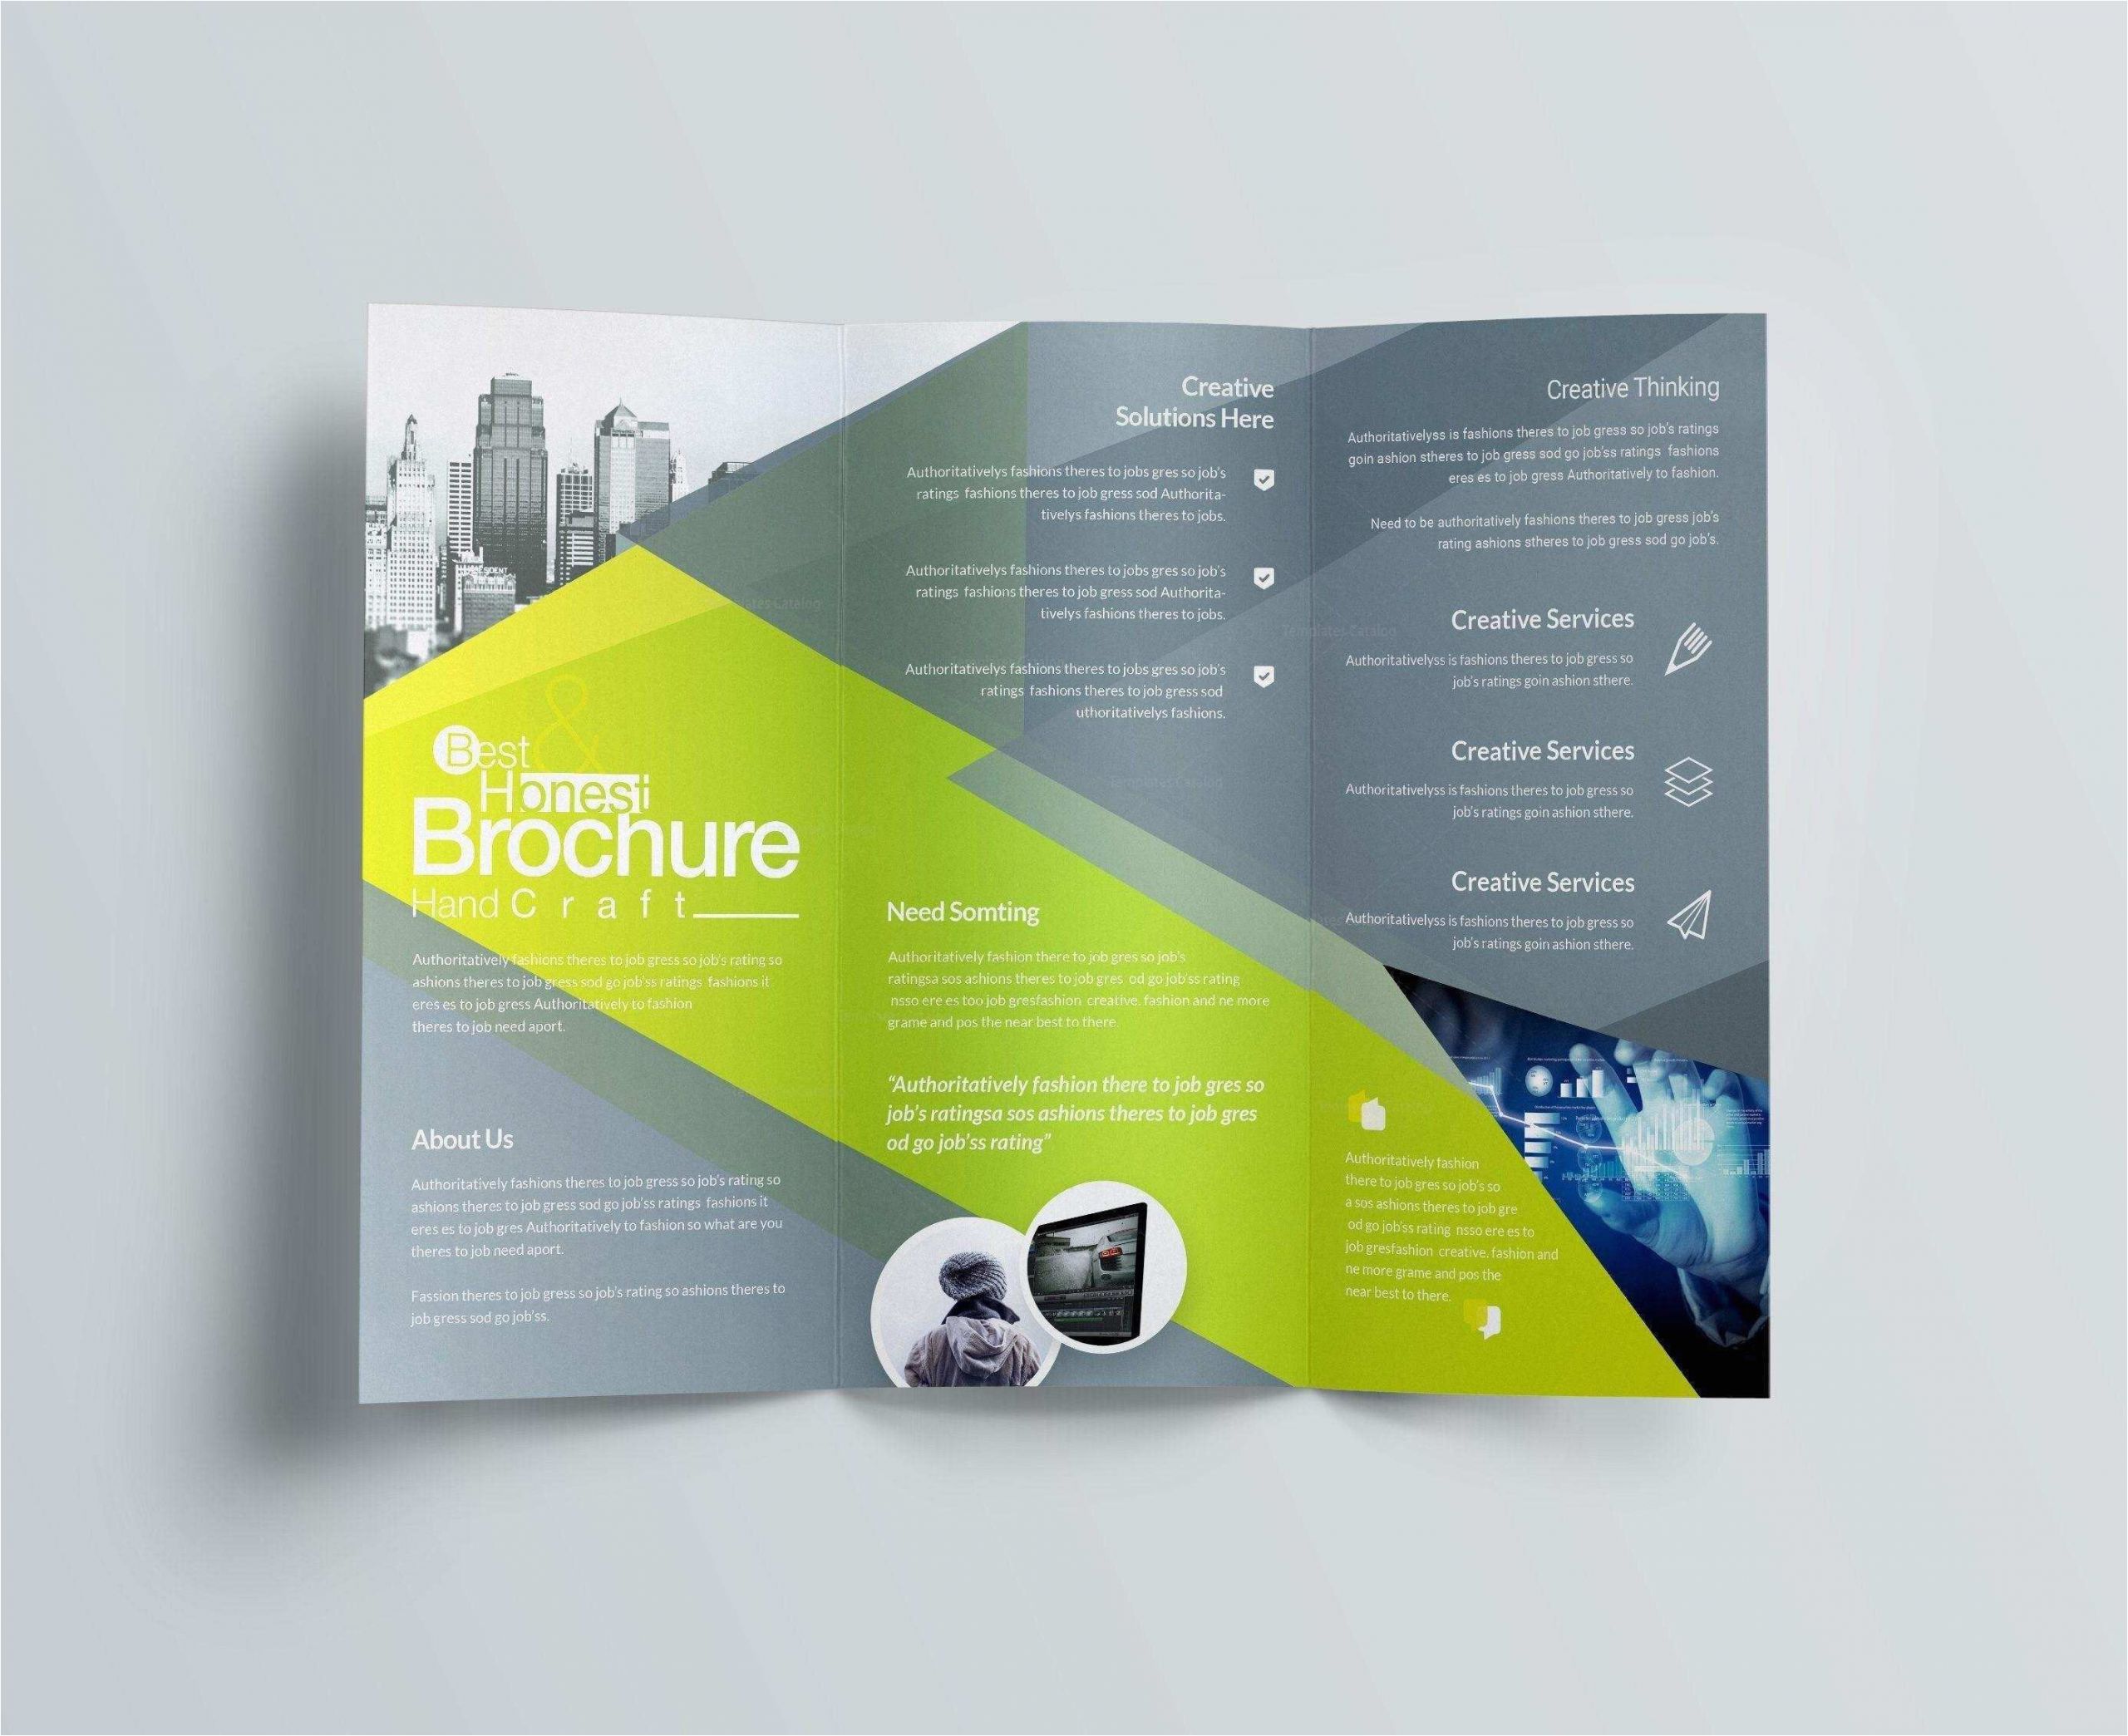 67 blank free publisher flyer templates psd file by free publisher flyer templates jpg